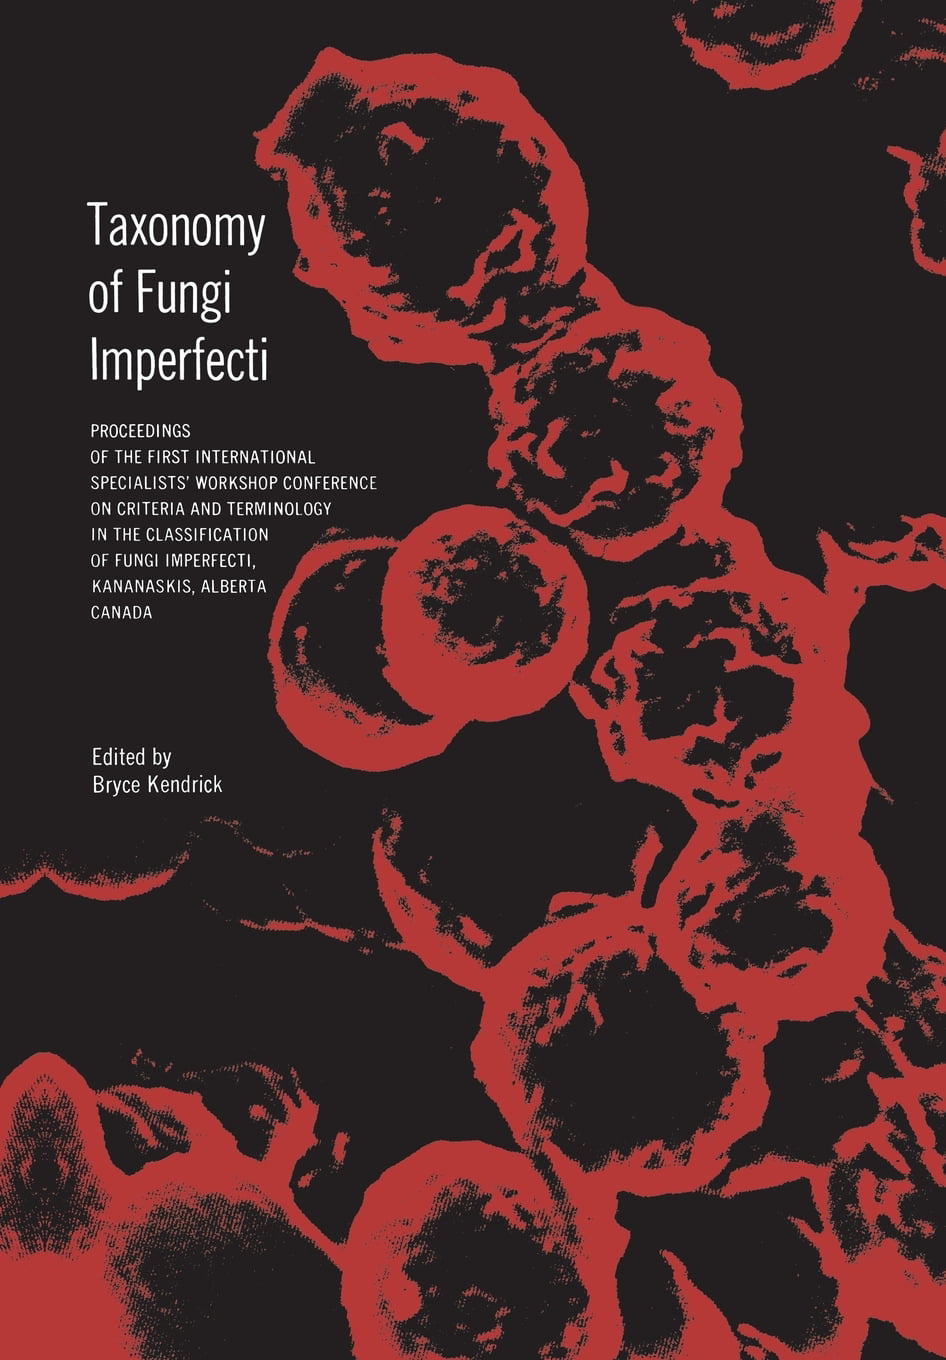 Taxonomy of Fungi Imperfecti: Proceedings of the First International